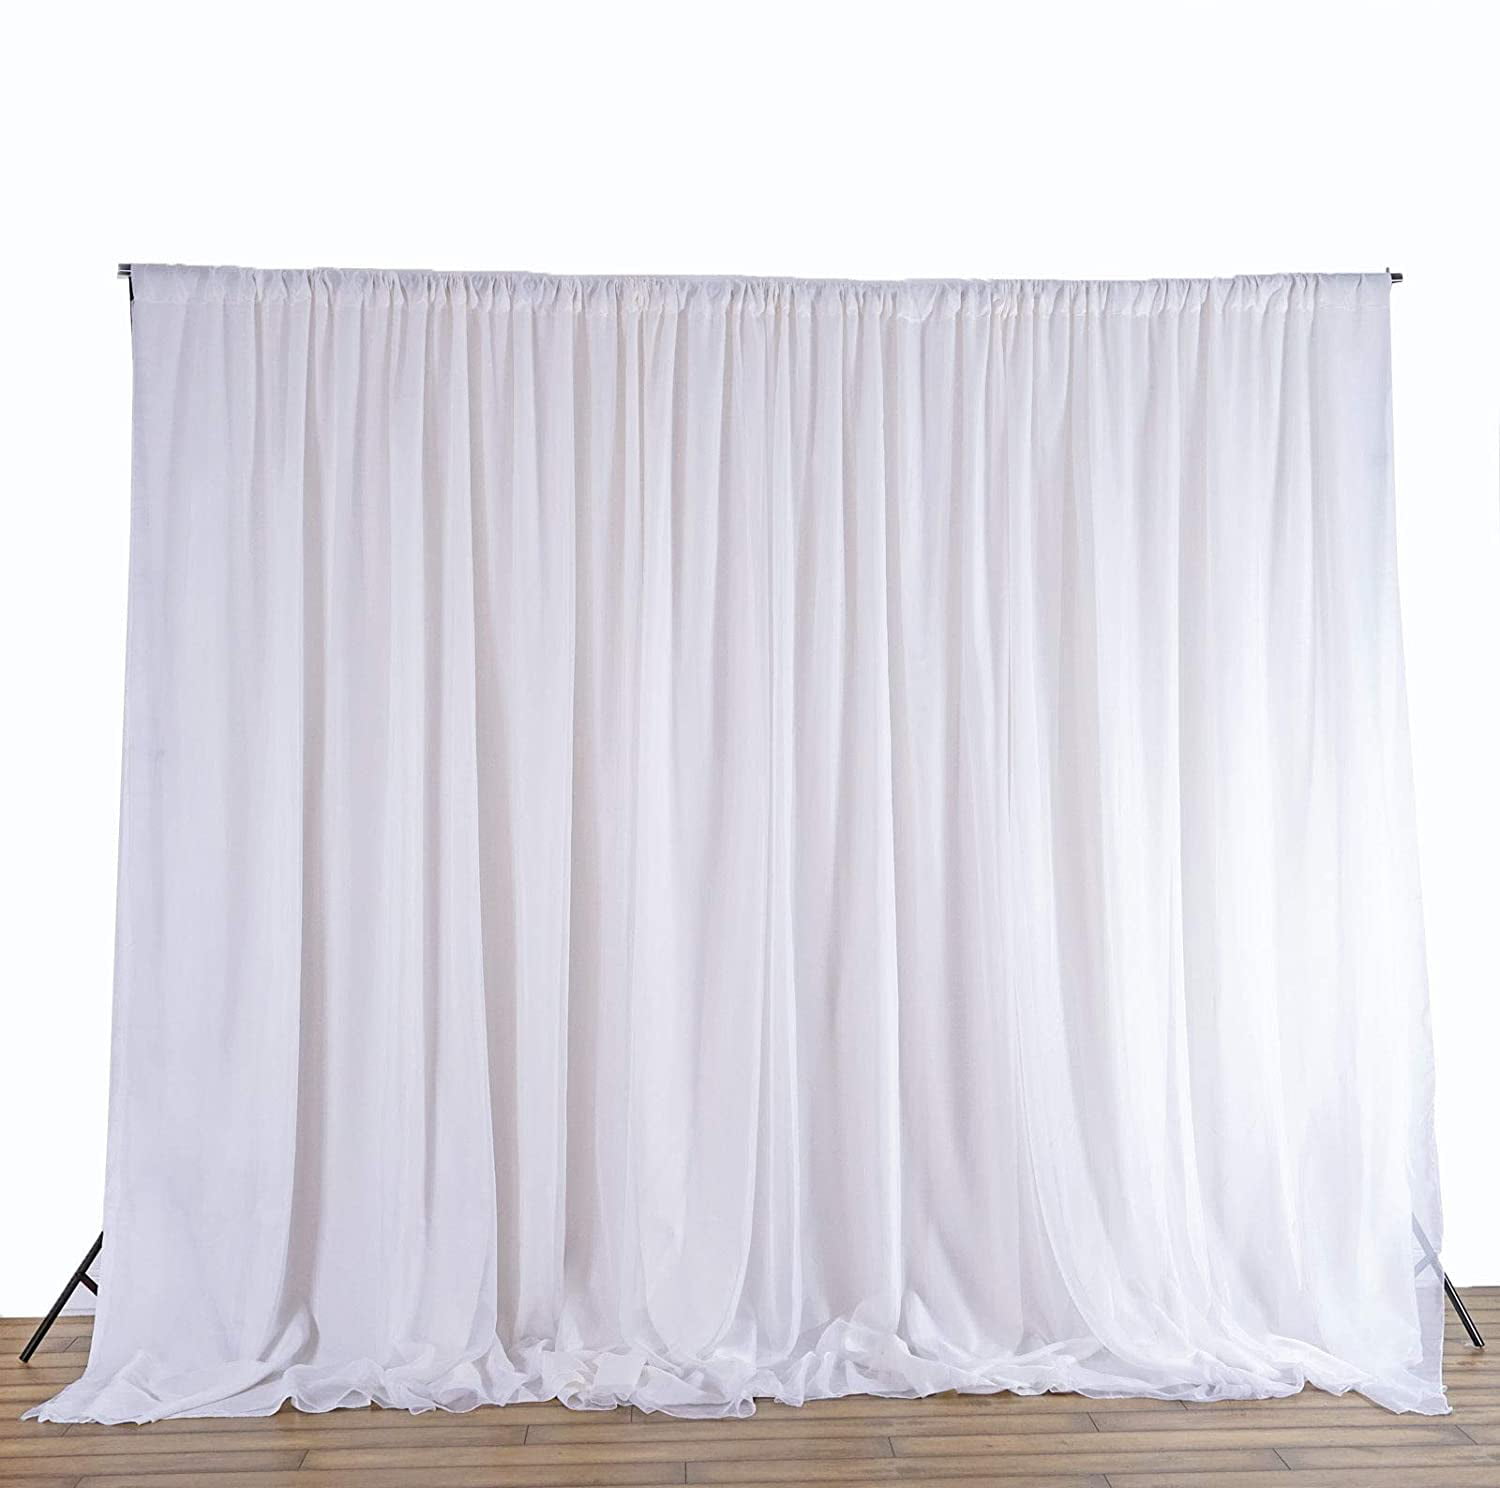 White Ceiling Draping Sheer Voile Chiffon Drape Panel Backdrop Wall Divider 